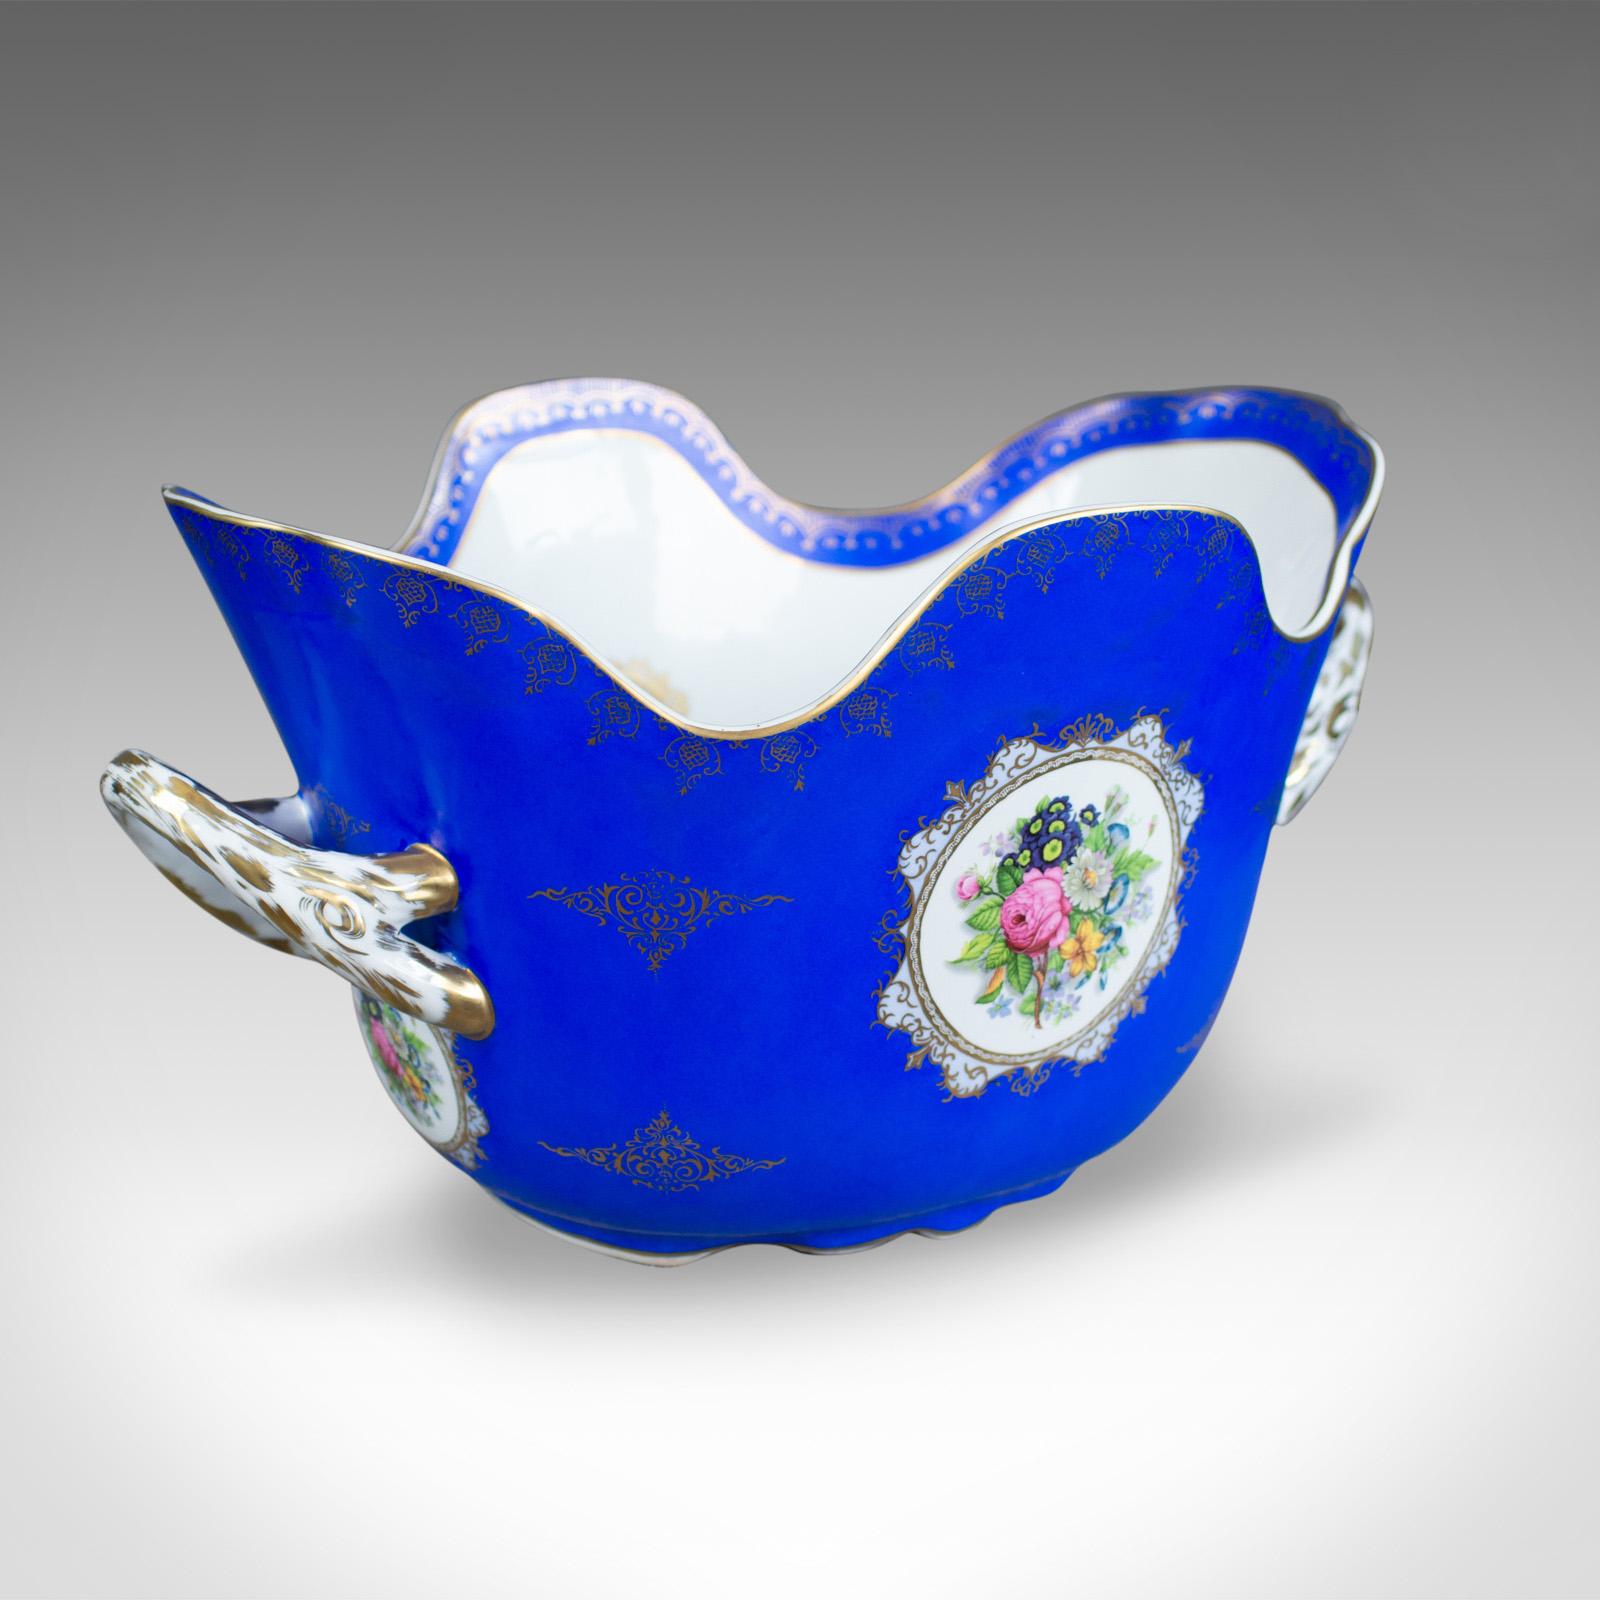 This is a large porcelain wine cooler, Meissen taste, multi-bottle champagne ice bucket, 20th century.

A large piece in very good order throughout
Floral painted panels on a vivid blue ground
Highlighted with golden trace to the rim and panel